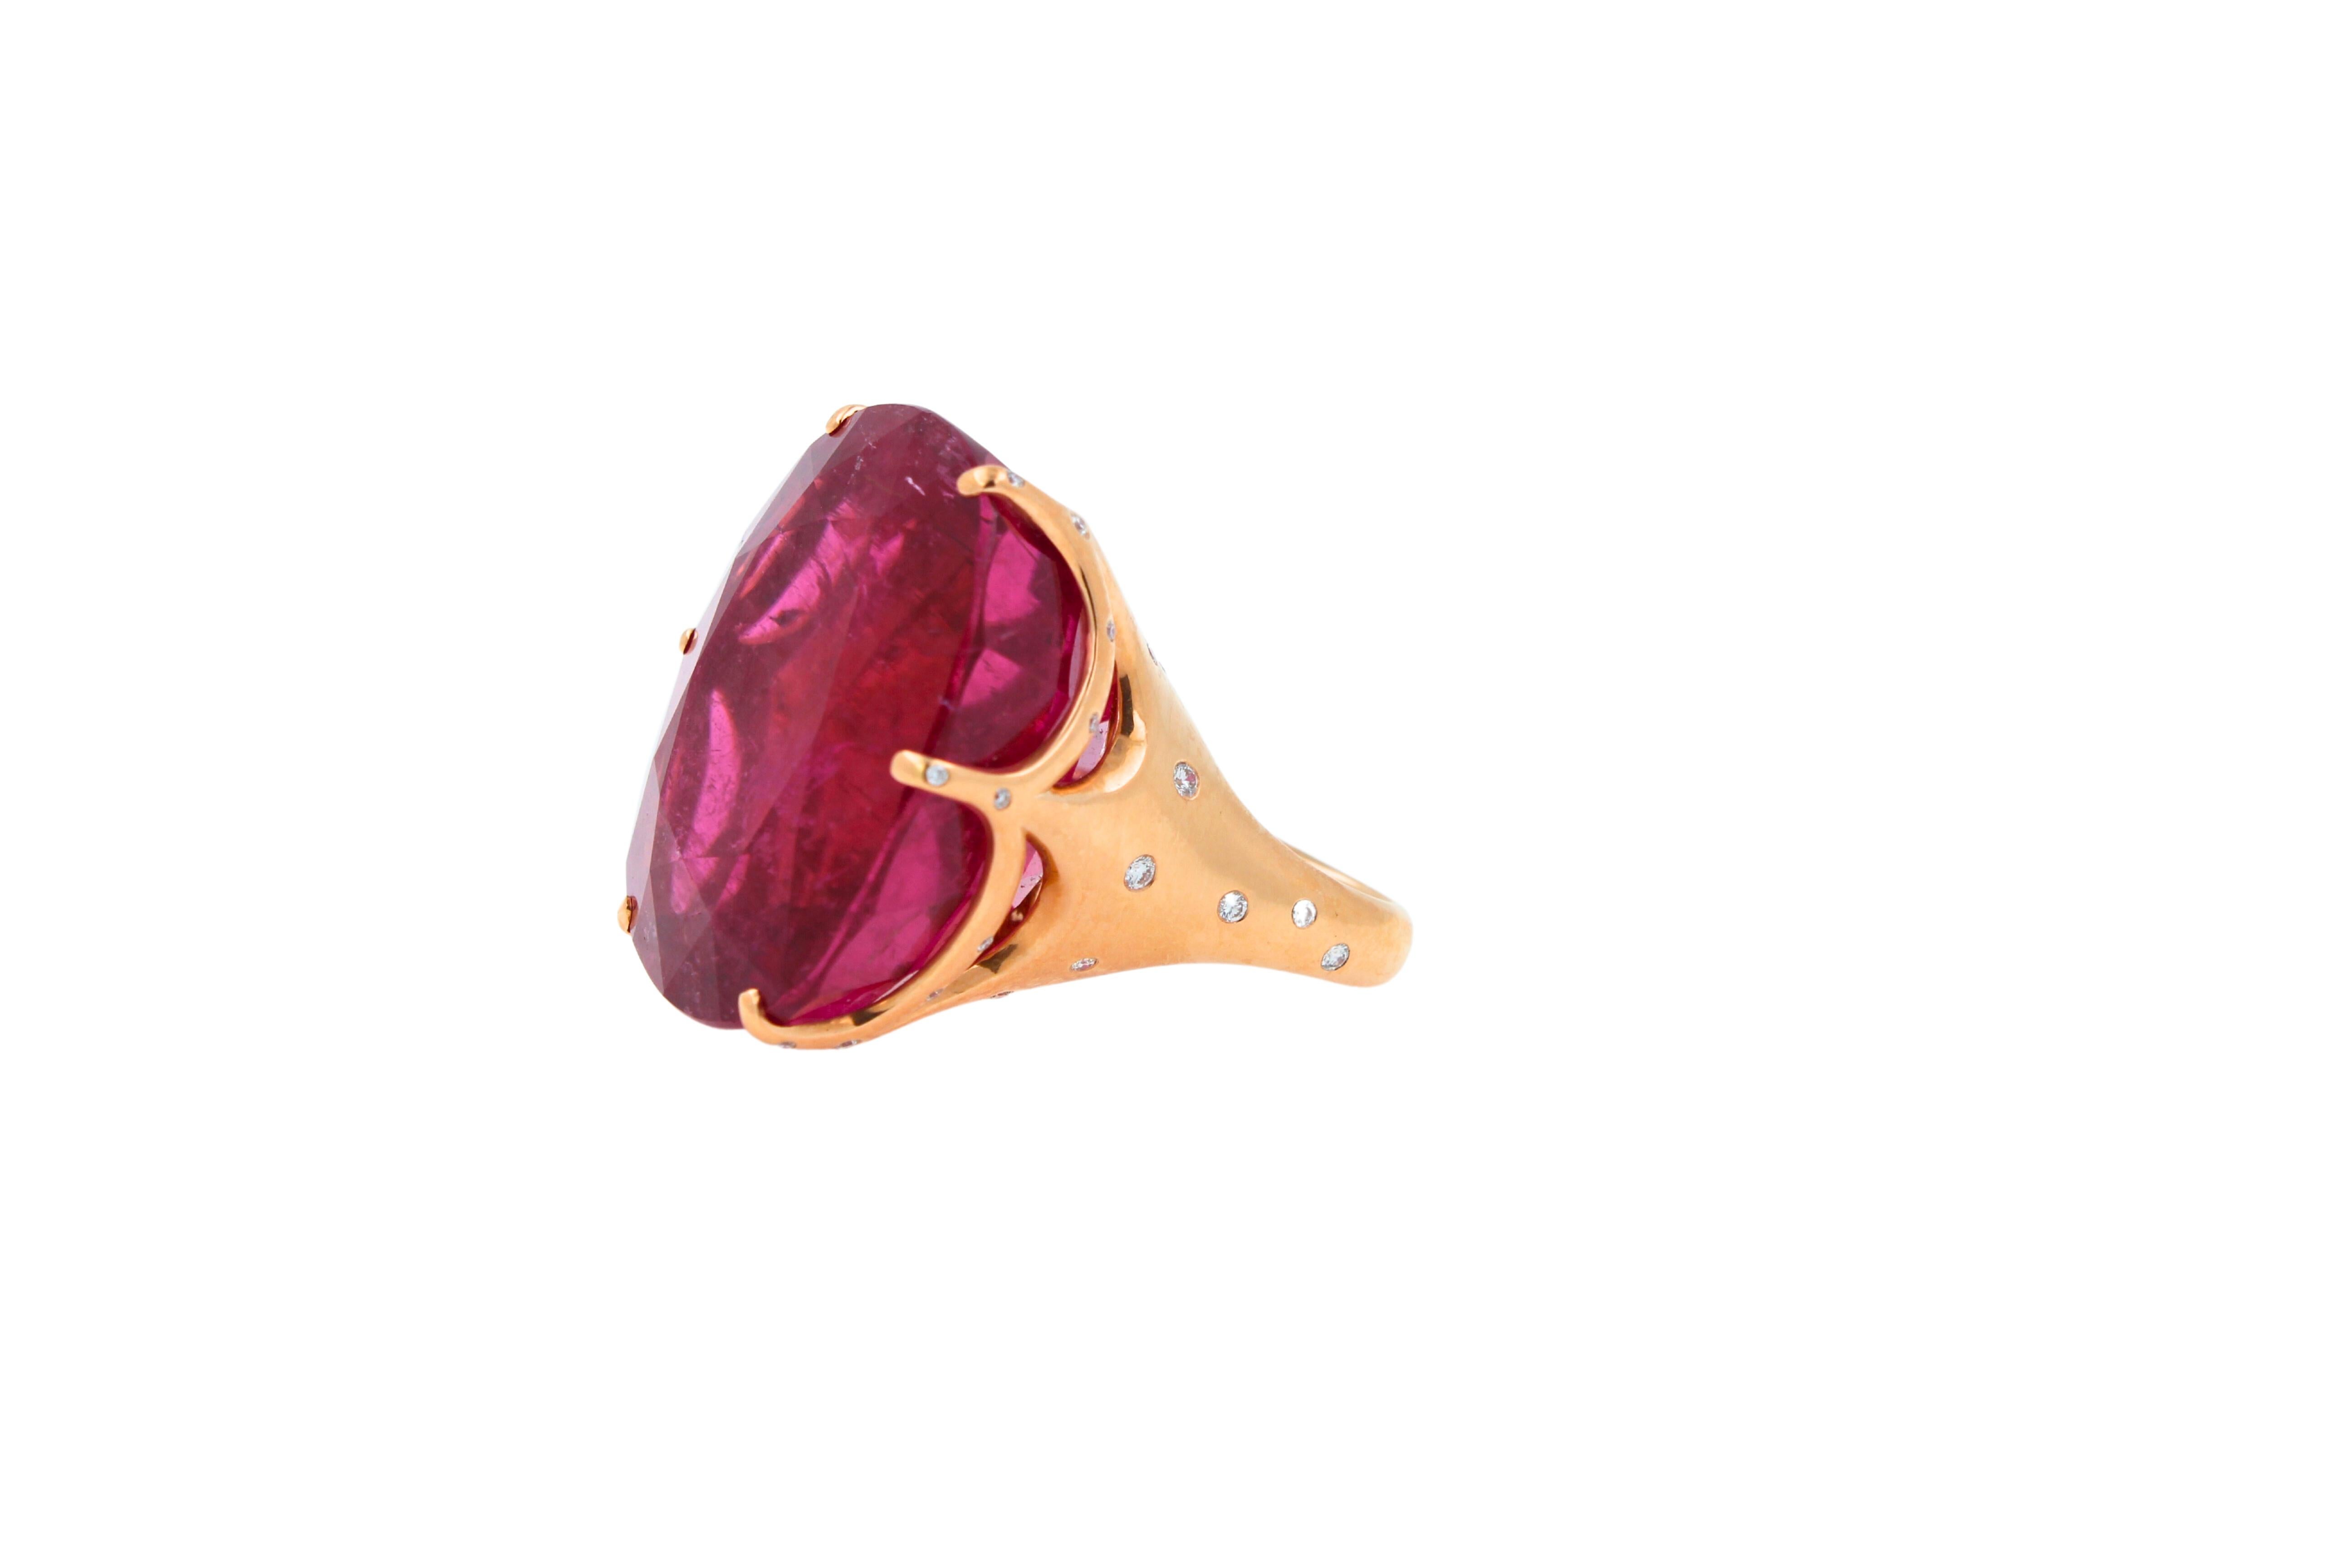 Huge Unique 110 Carats Red Pink Maroon Rubellite 18k Rose Gold Diamond Ring For Sale 8